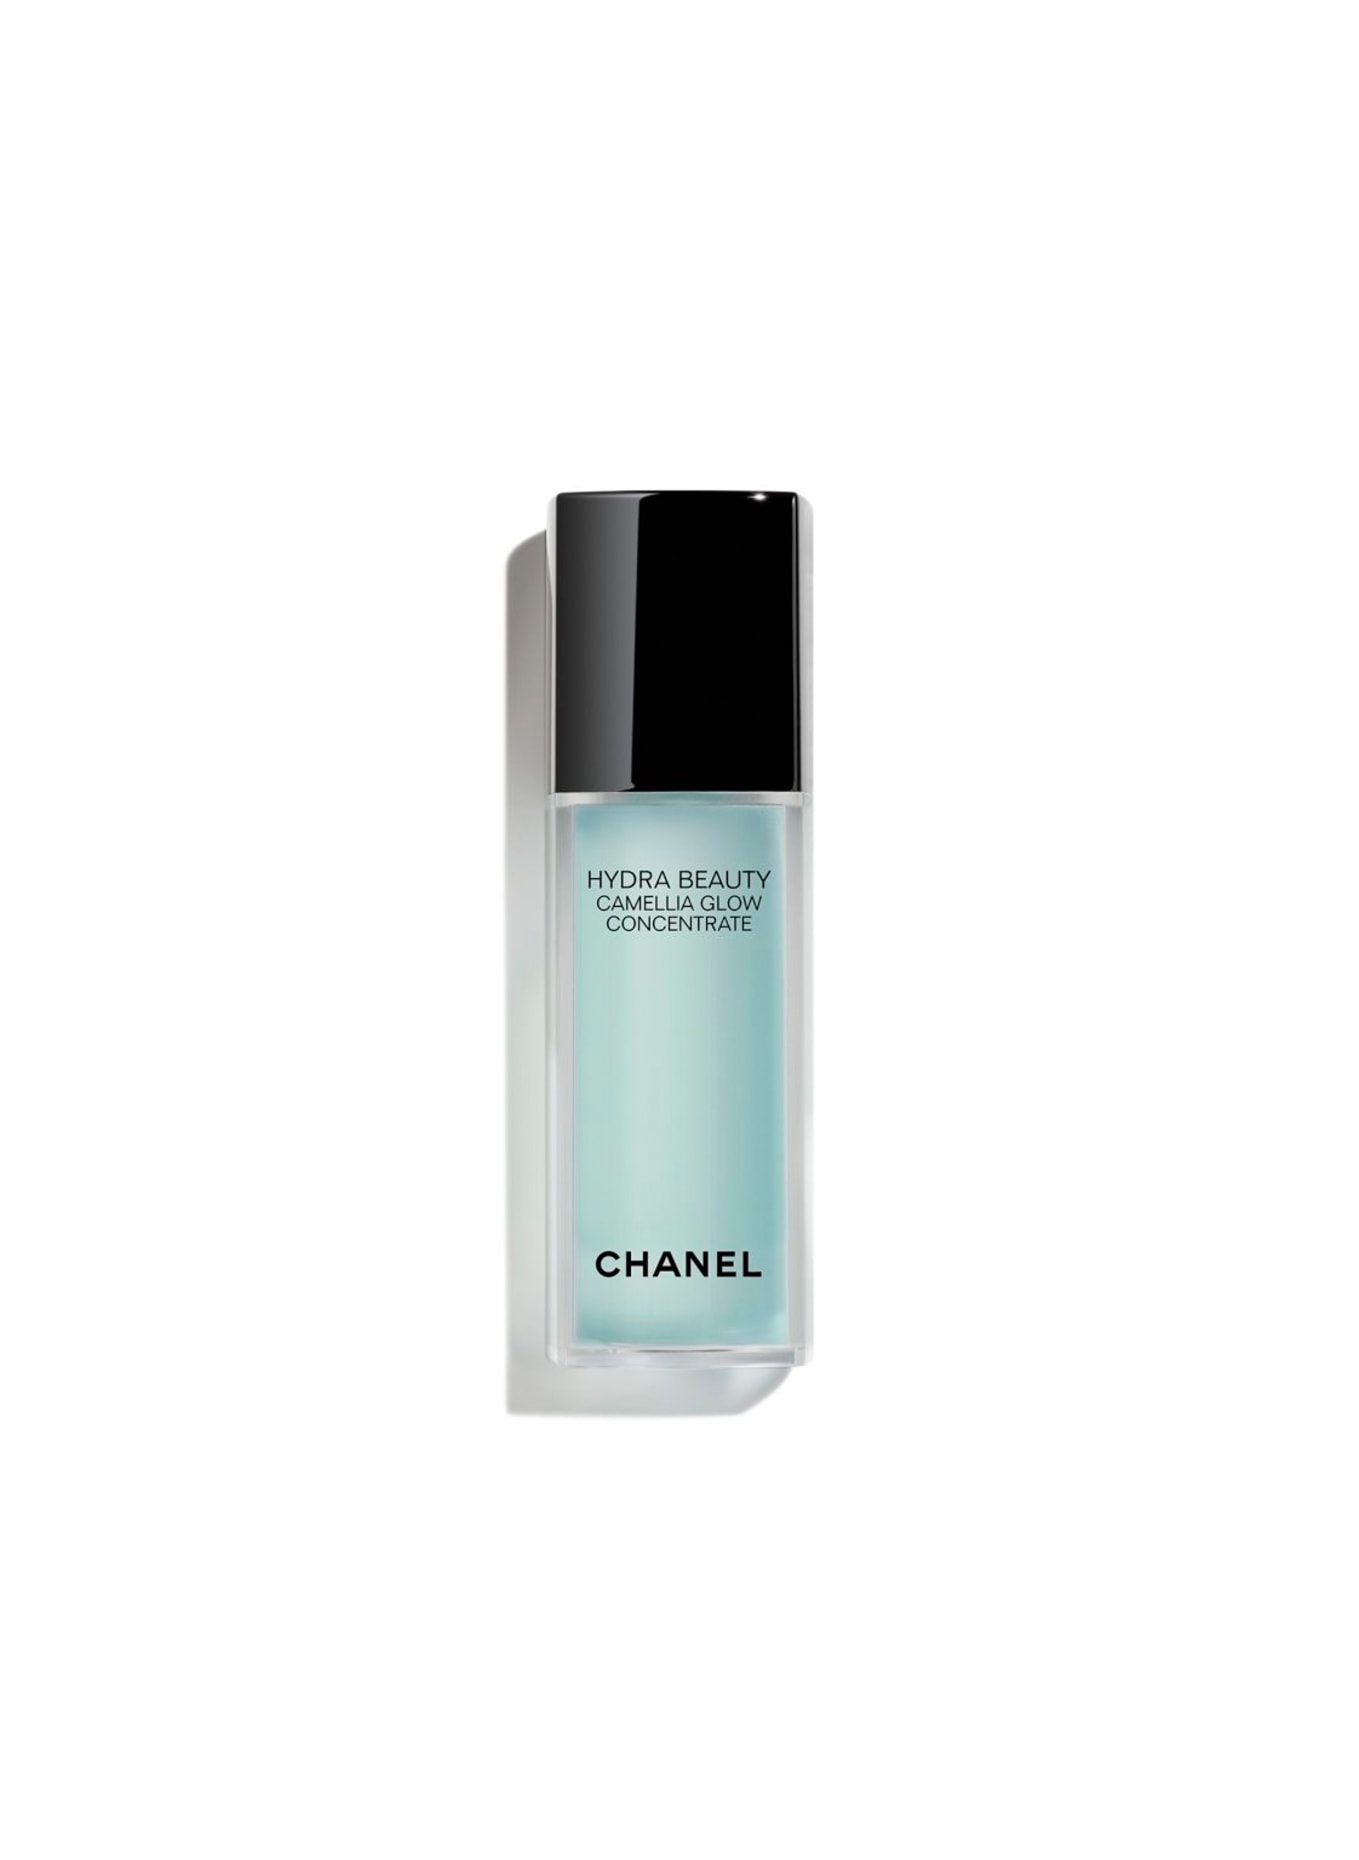 CHANEL HYDRA BEAUTY CAMELLIA GLOW CONCENTRATE (Obrazek 1)